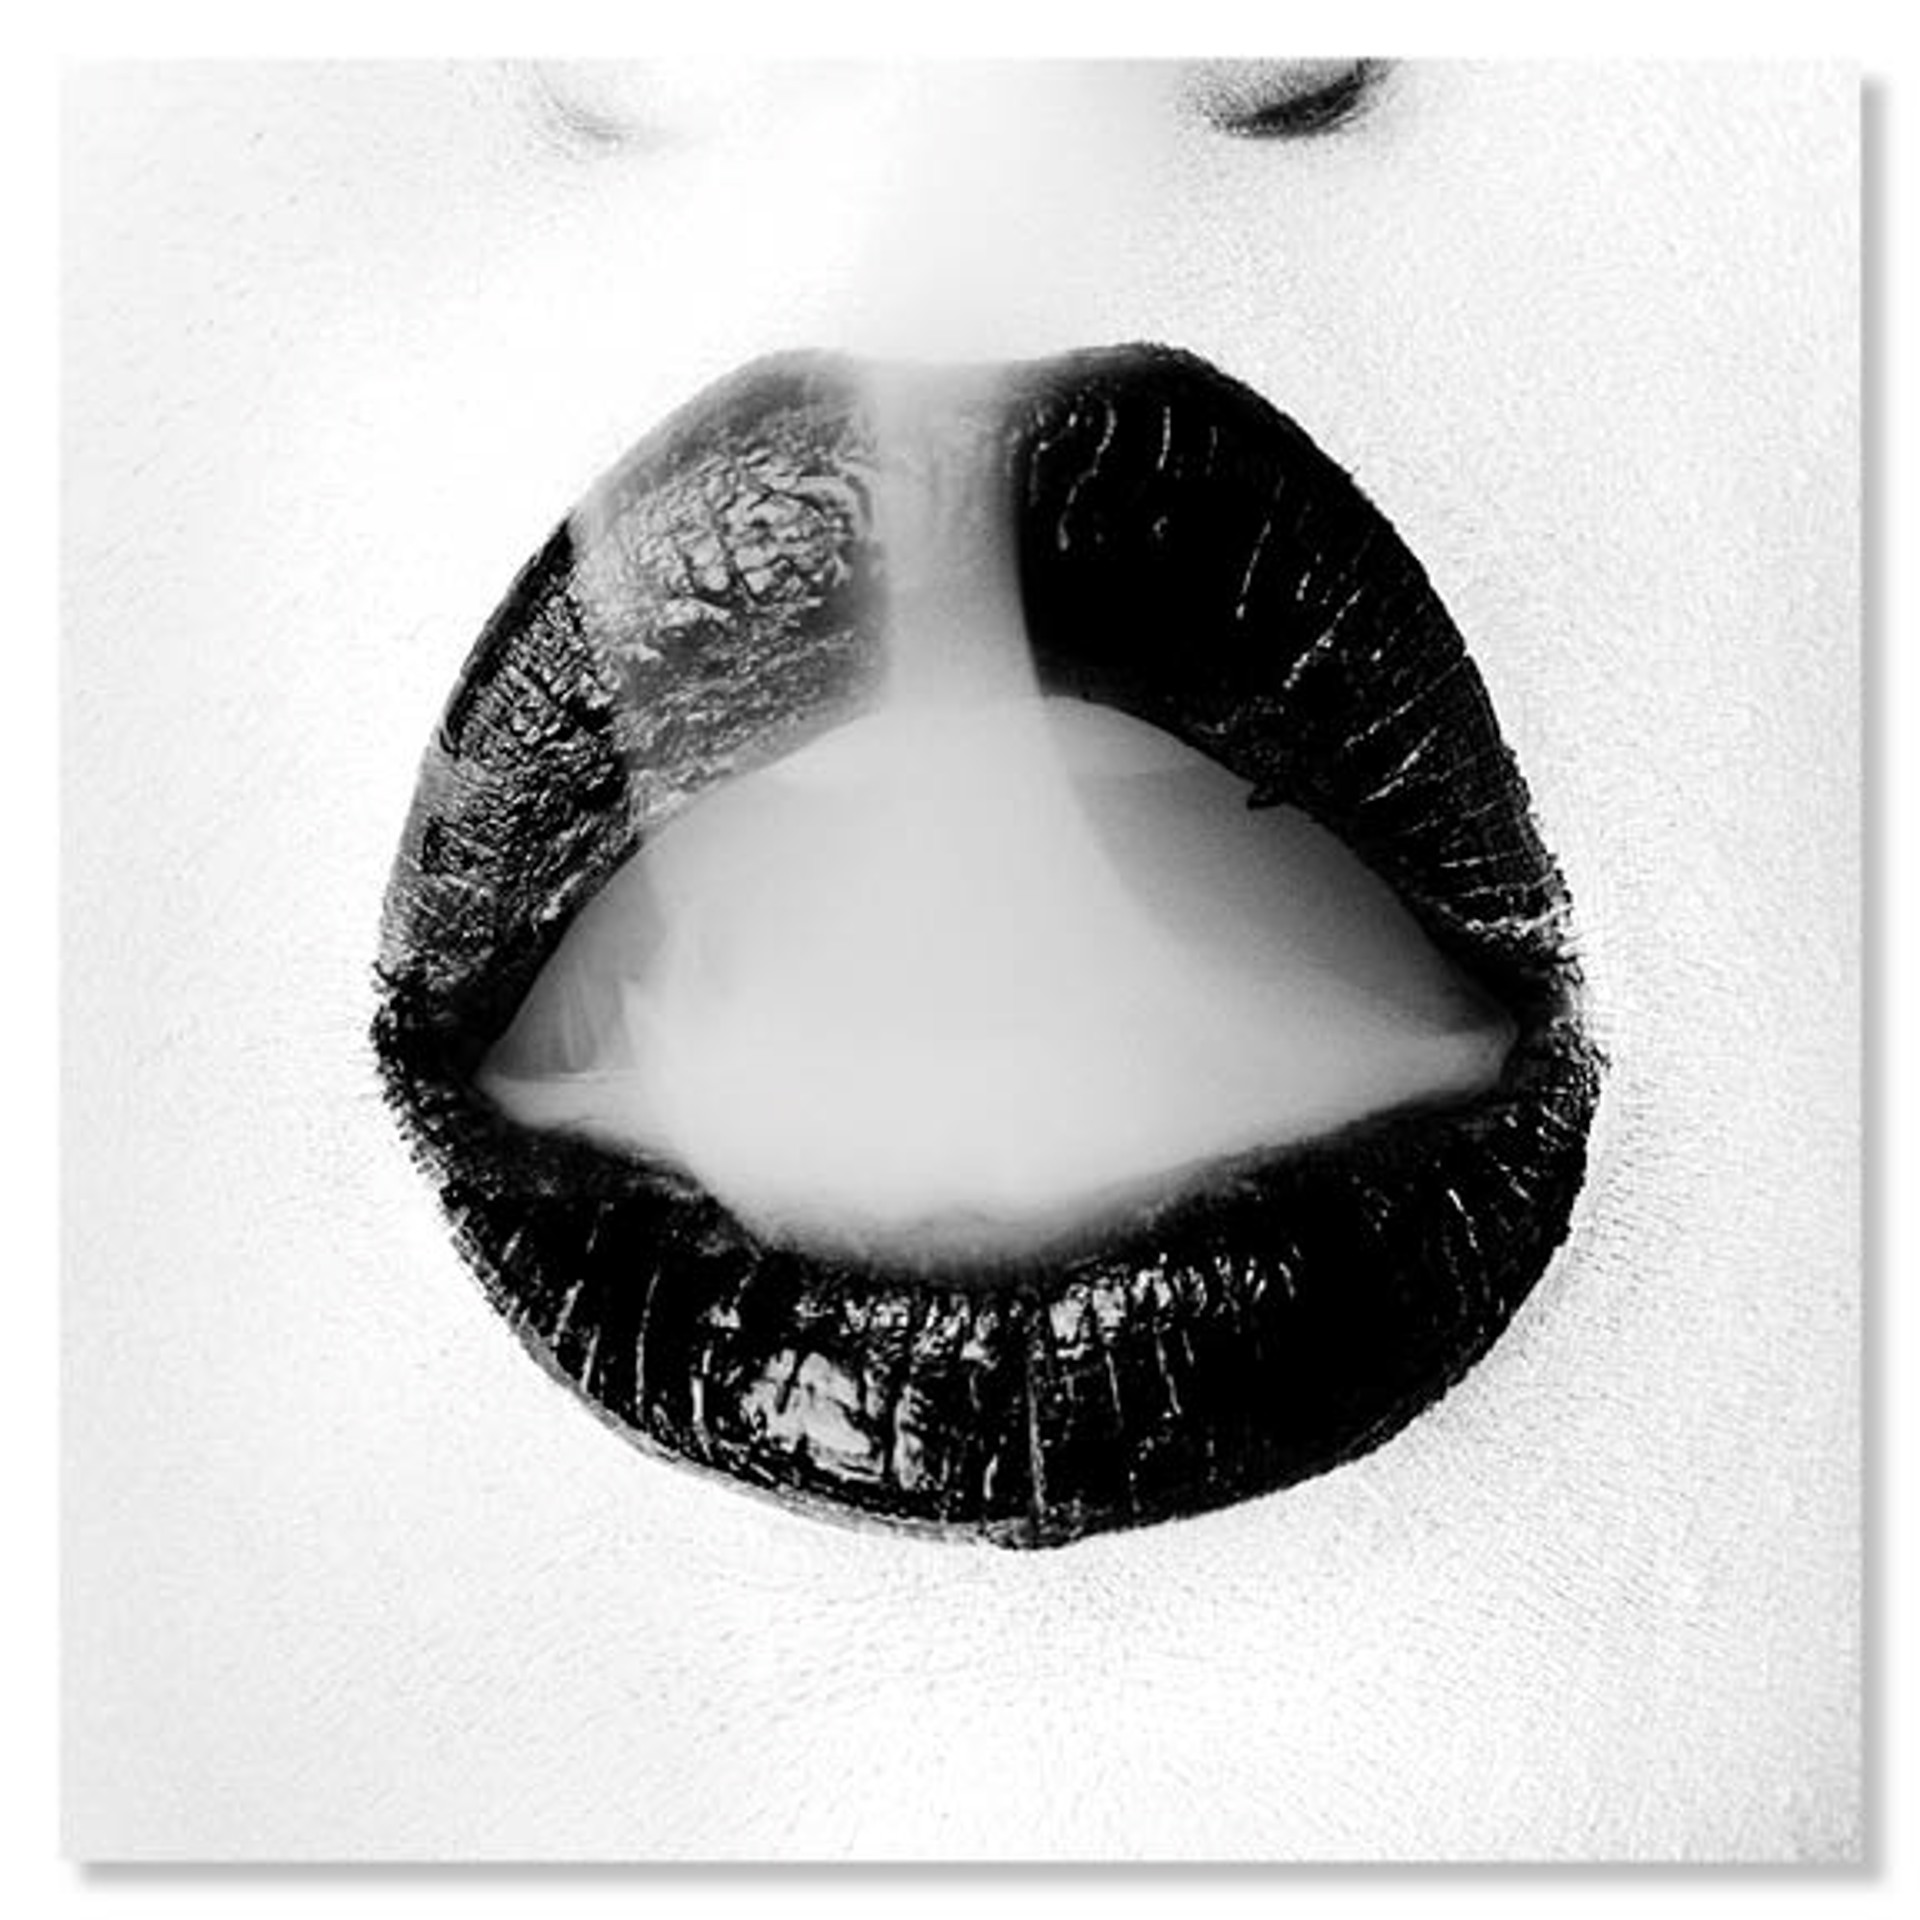 Exhale by Tyler Shields